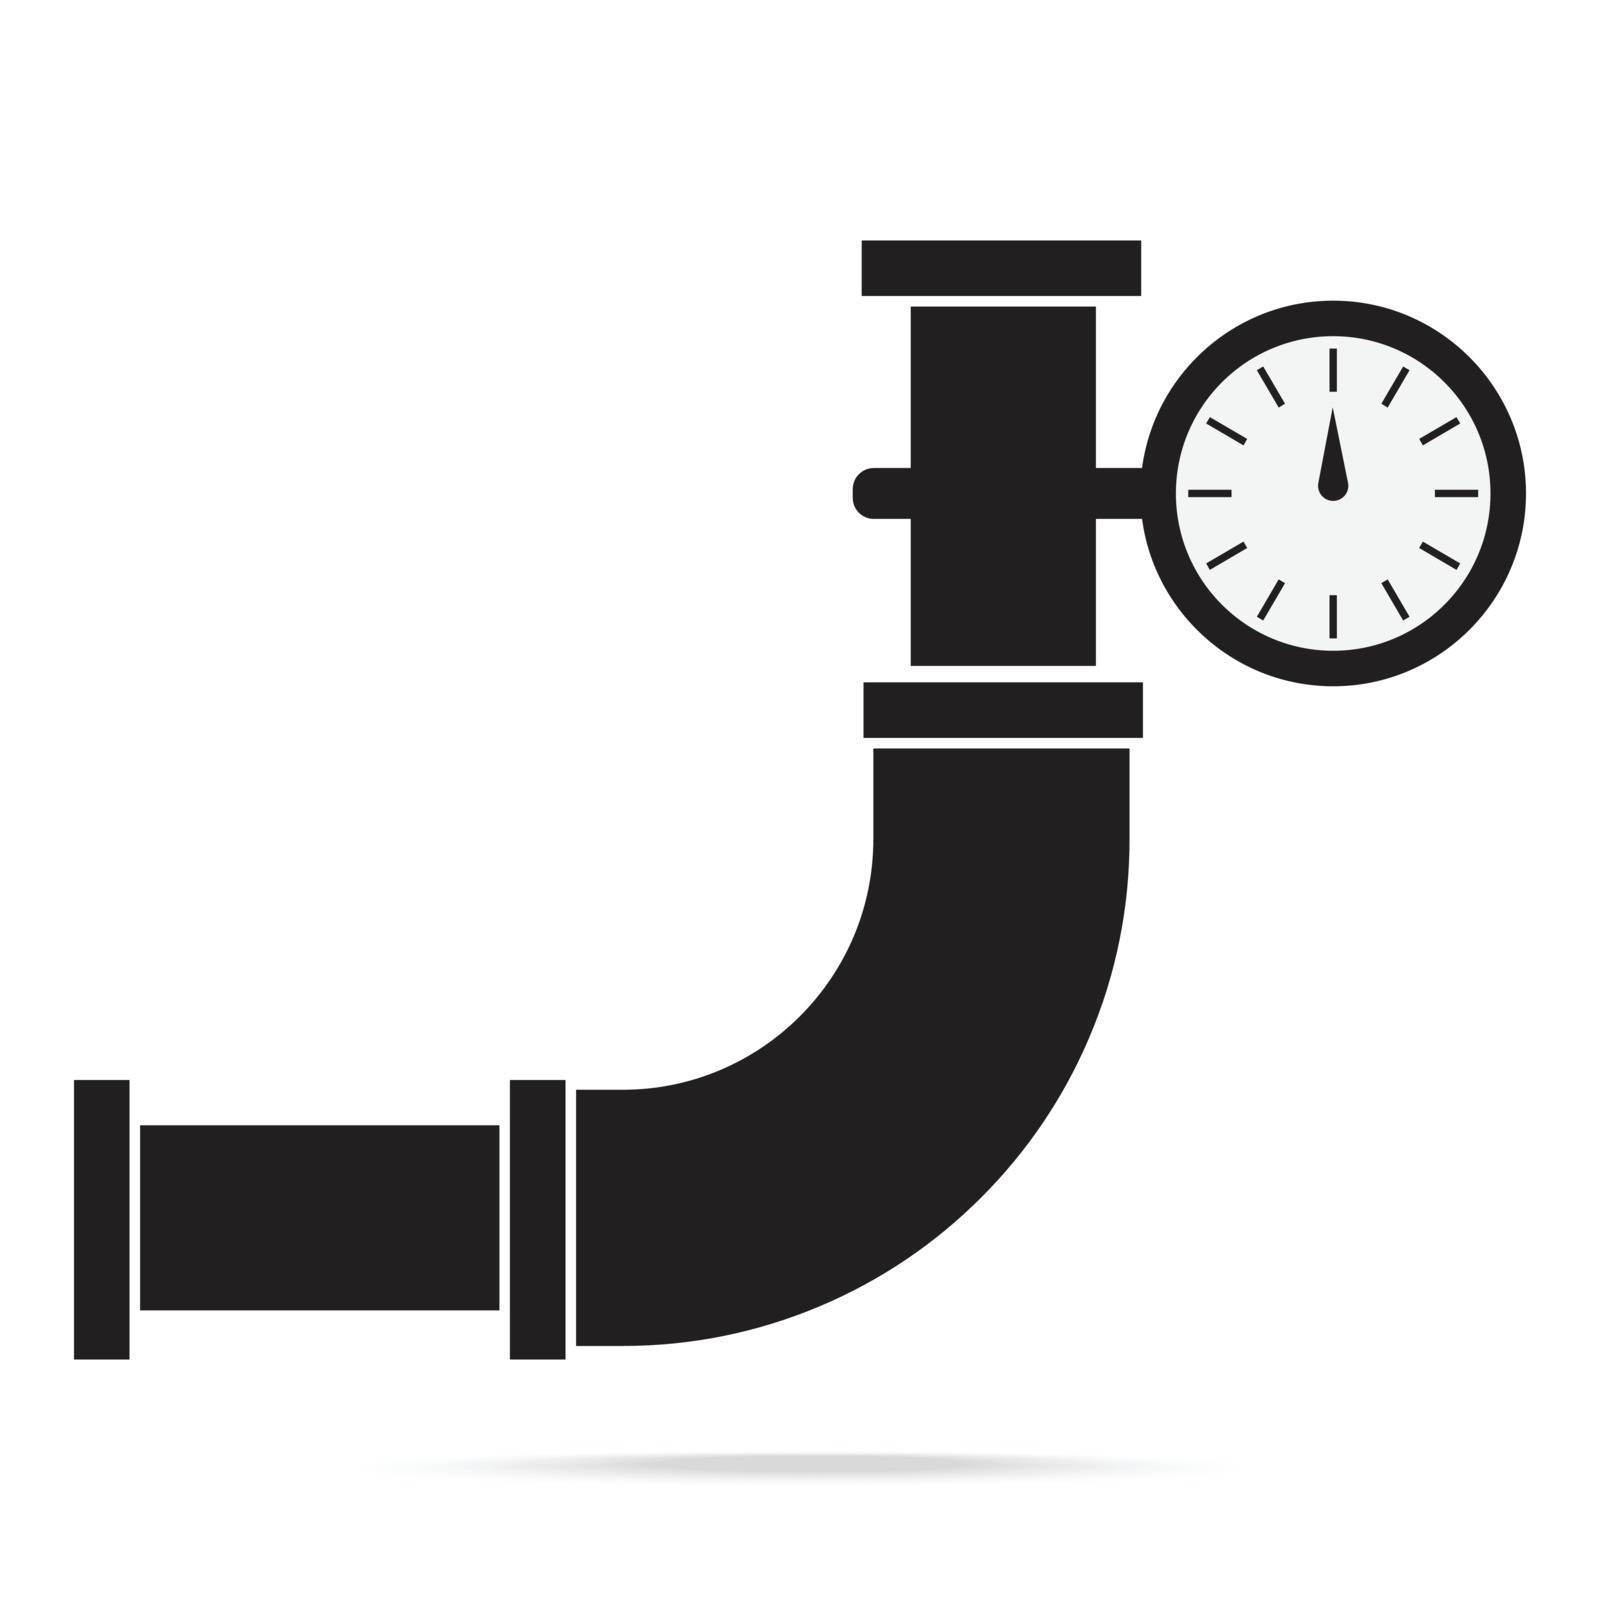 Pipe and gage pressure icon sign vector illustration by Kheat